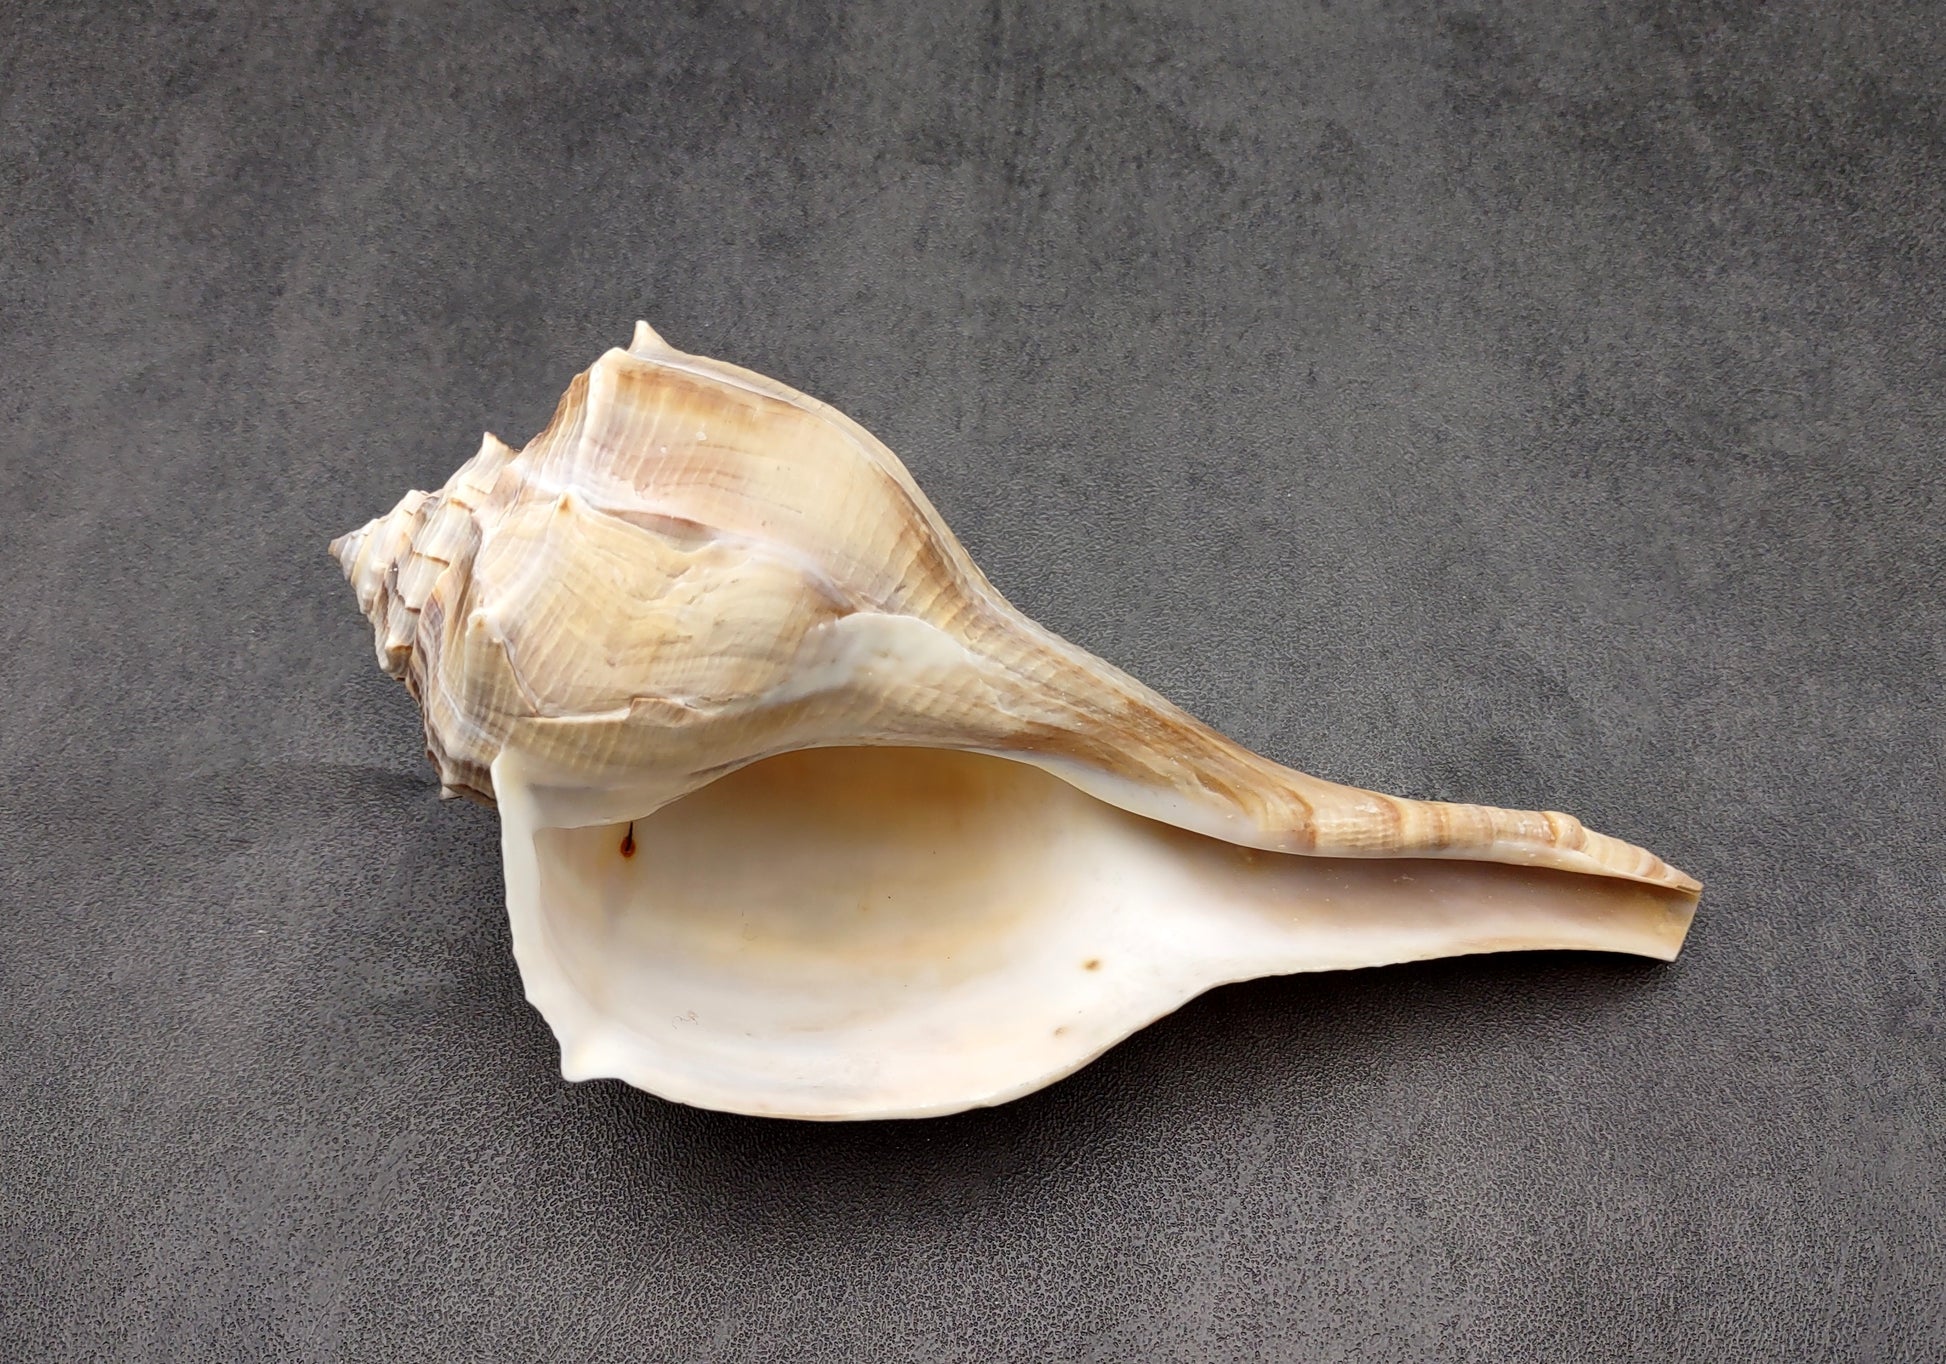 Lightning Whelk - Busycon Contrarium - (1 shell approx. 6-7 inches). One grey and white spiral shell with medium sized opening. Copyright 2022 SeaShellSupply.com.